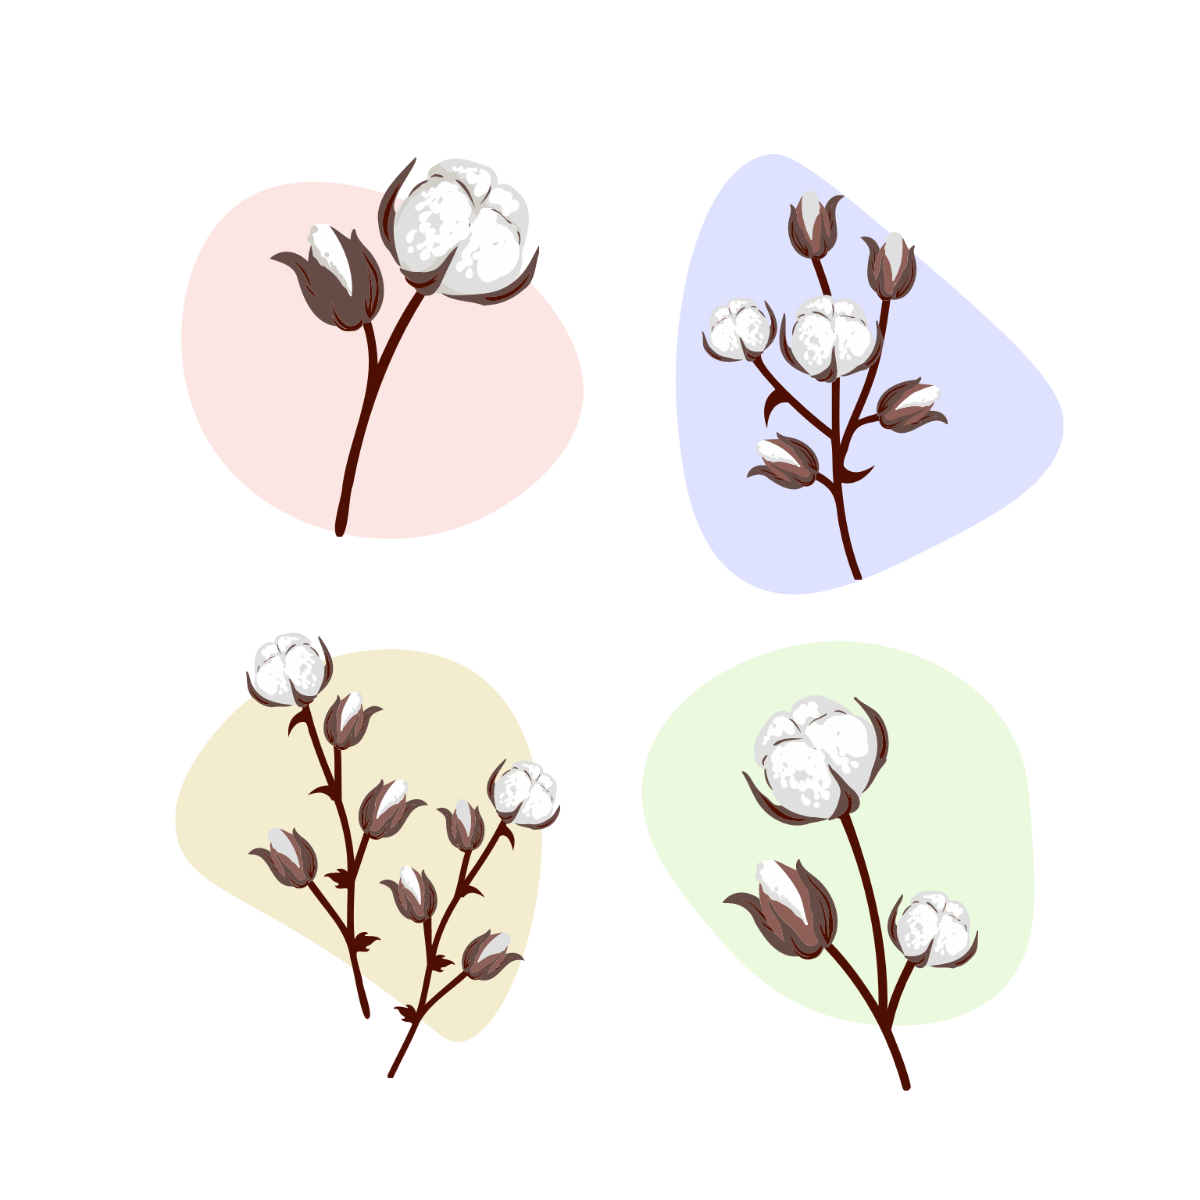 Free Cotton Plant Vector Template